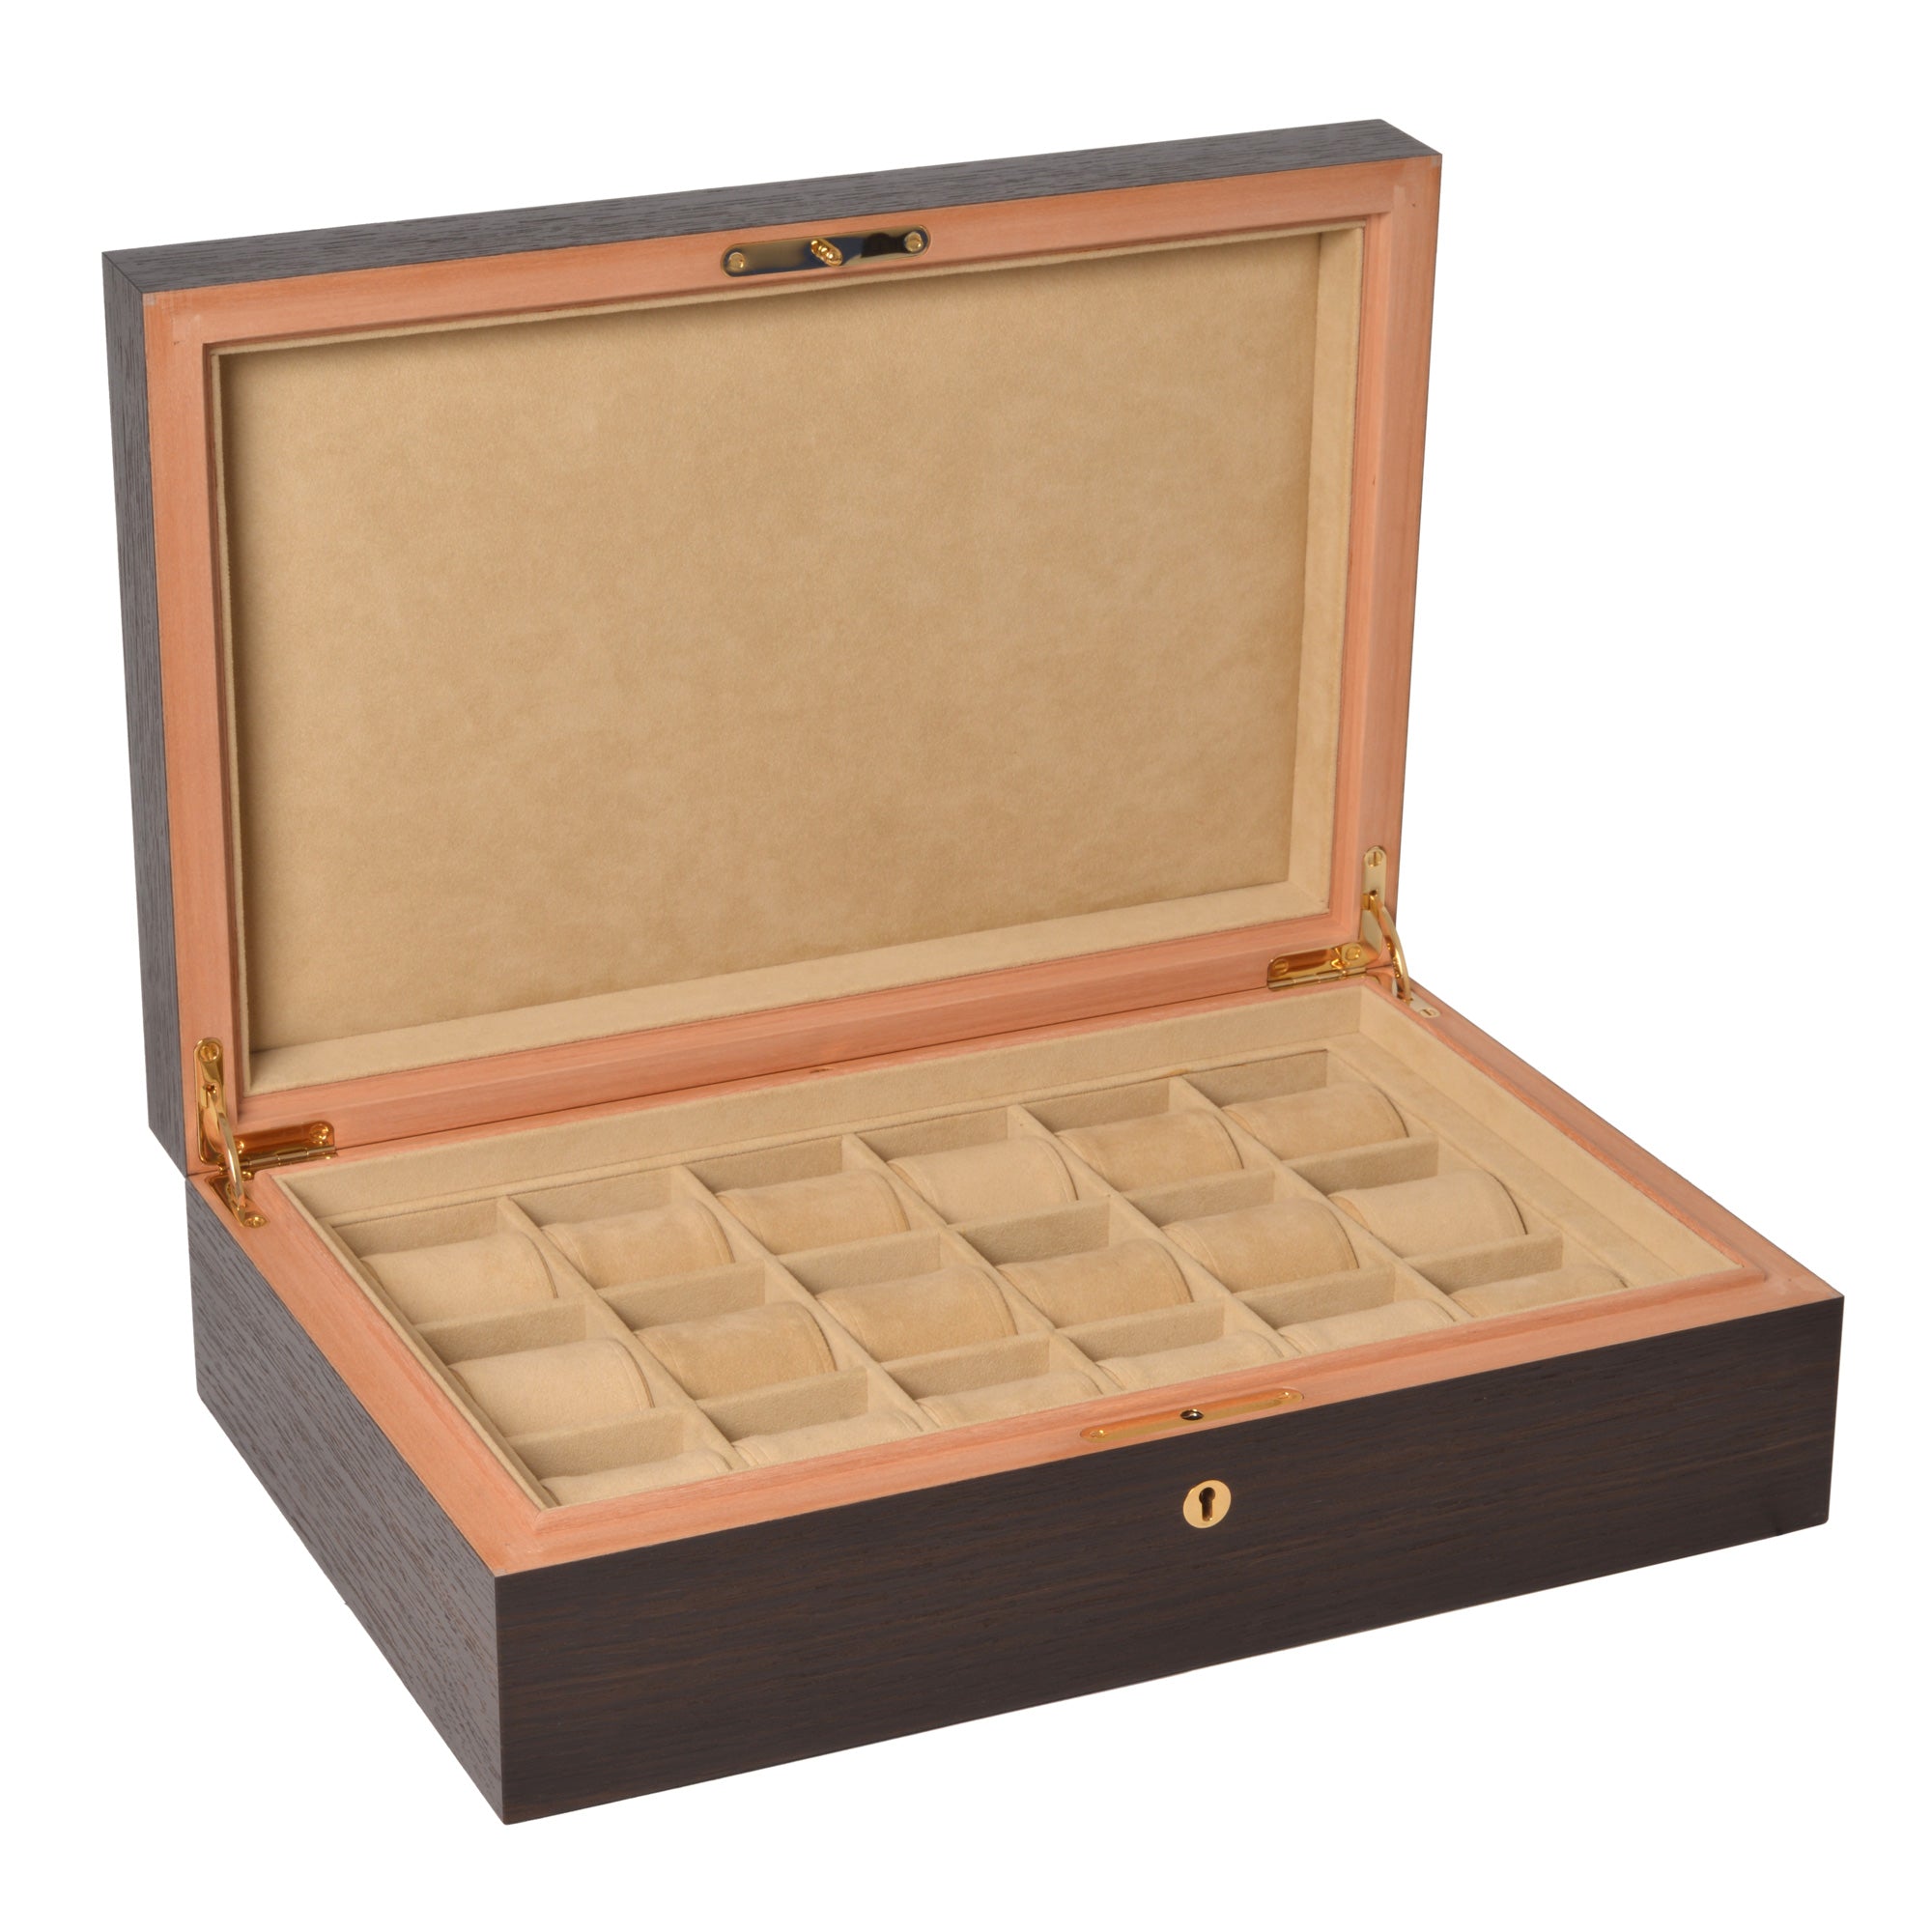 "Classique" - Boxed set of 18 watches